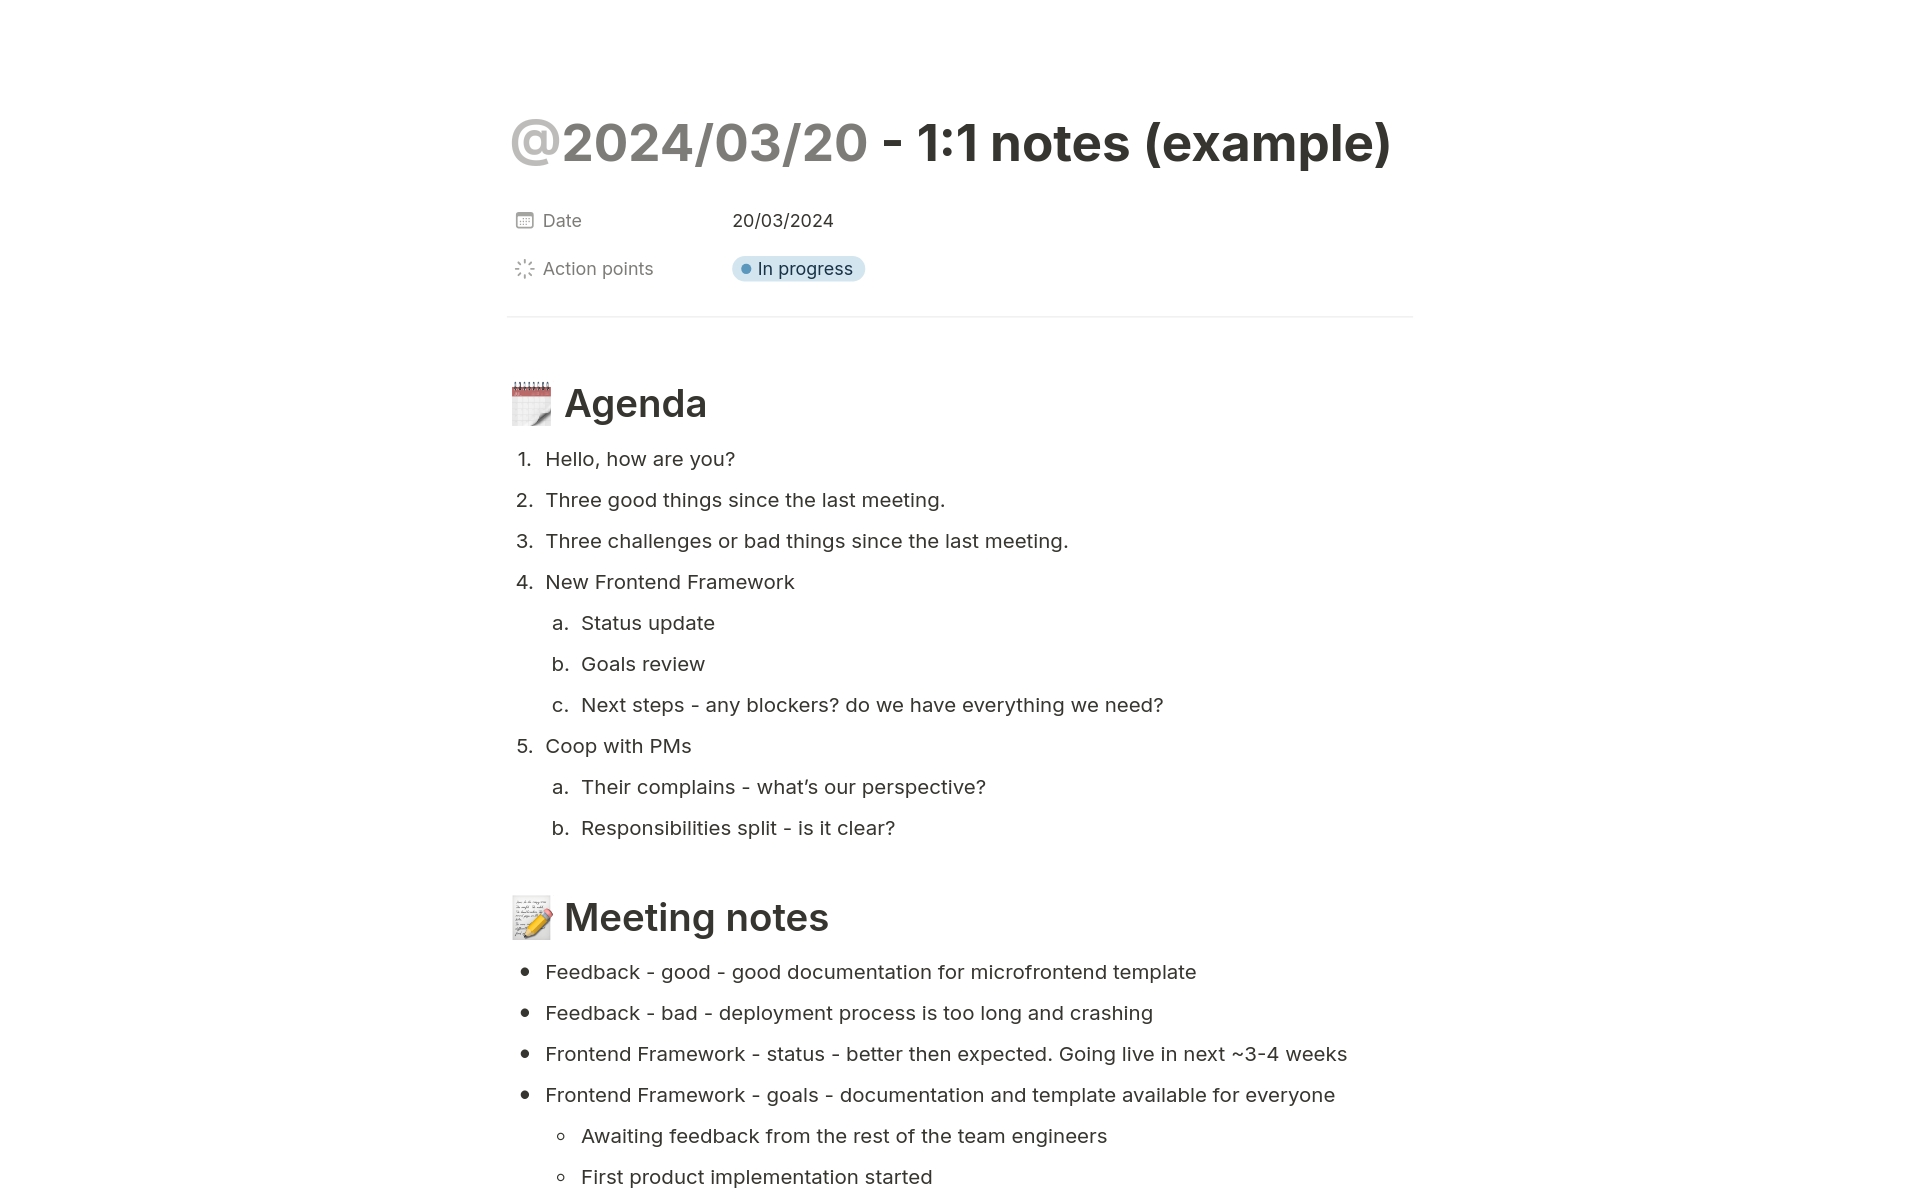 Template document to manage 1:1 sessions with your direct reports.